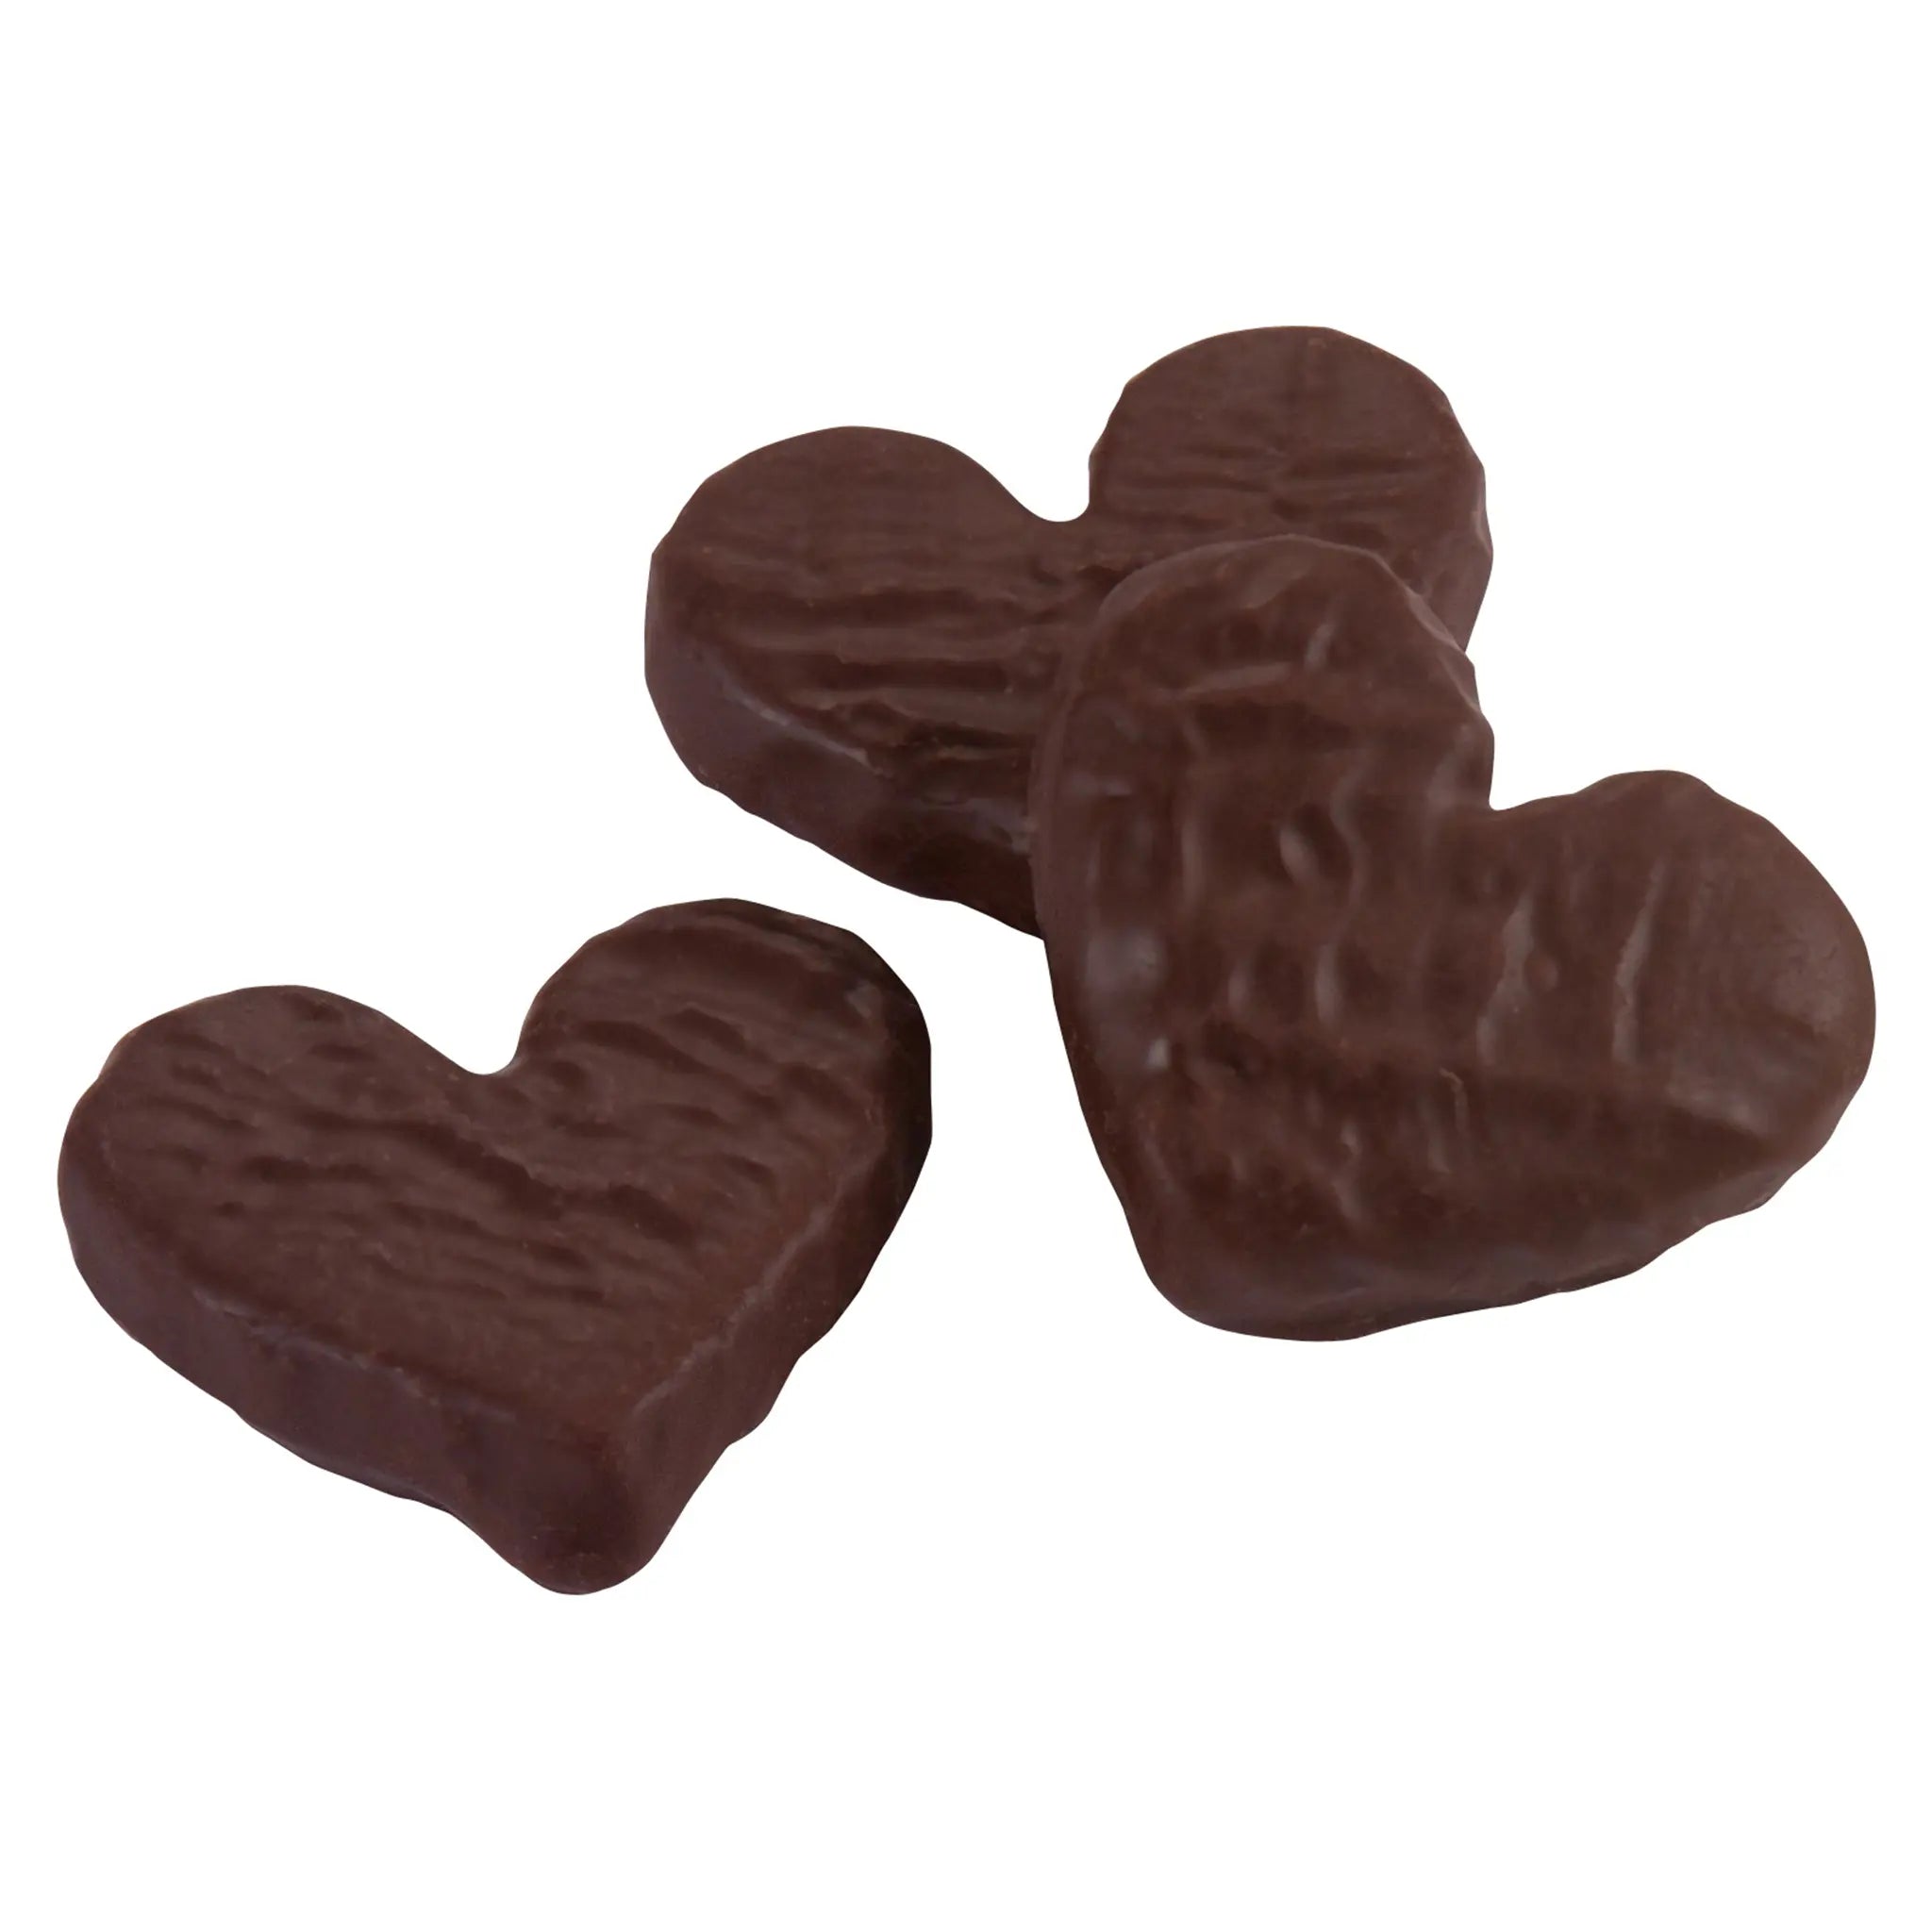 three heart shaped chocolate coated kendal mint cake pieces